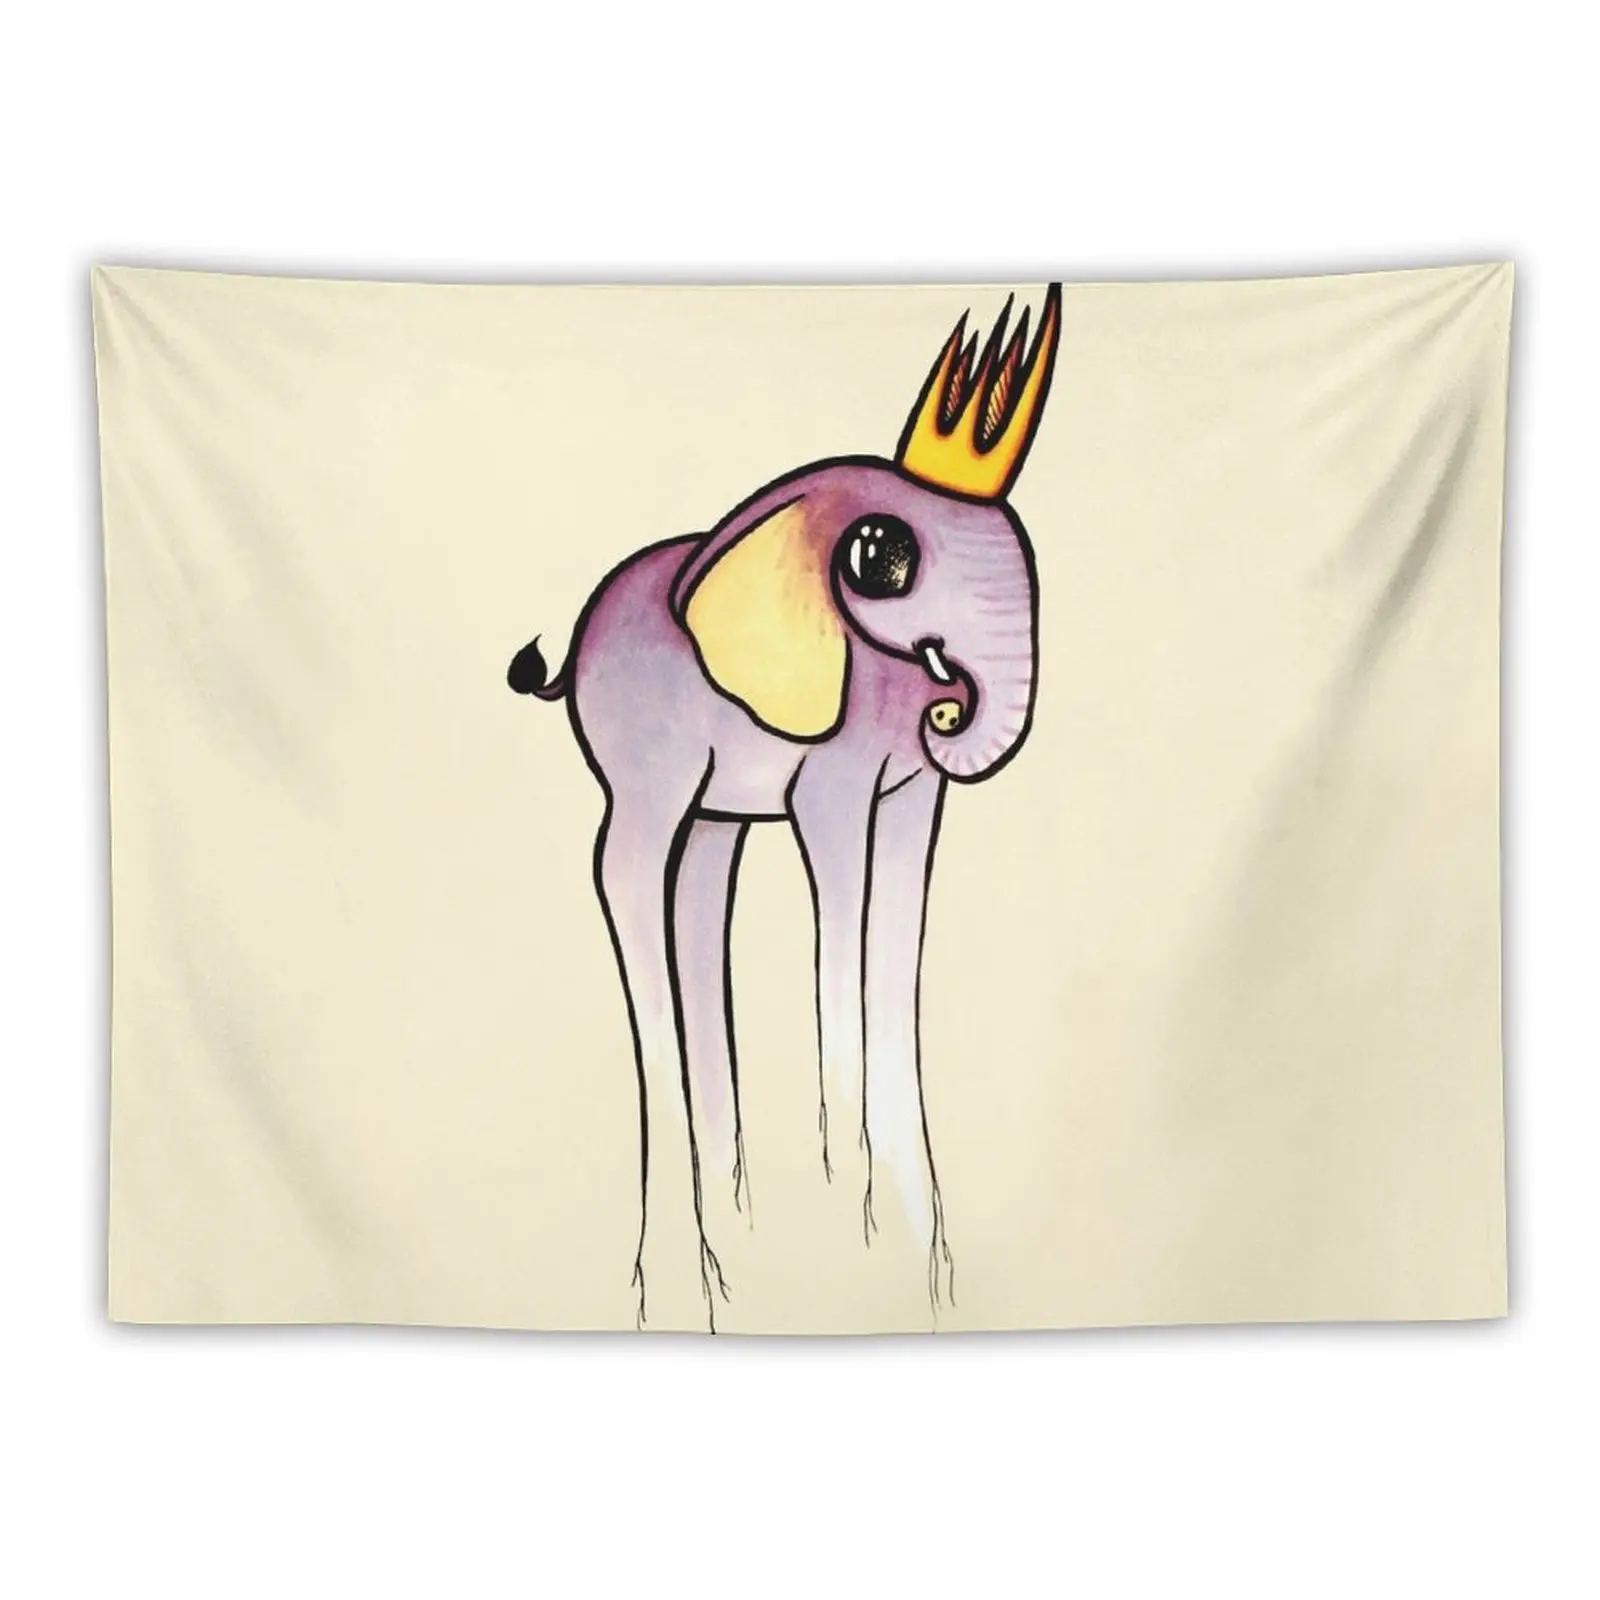 

Royal. Tapestry Room Decorations Aesthetics Things To The Room Mushroom Tapestry Wall Hanging